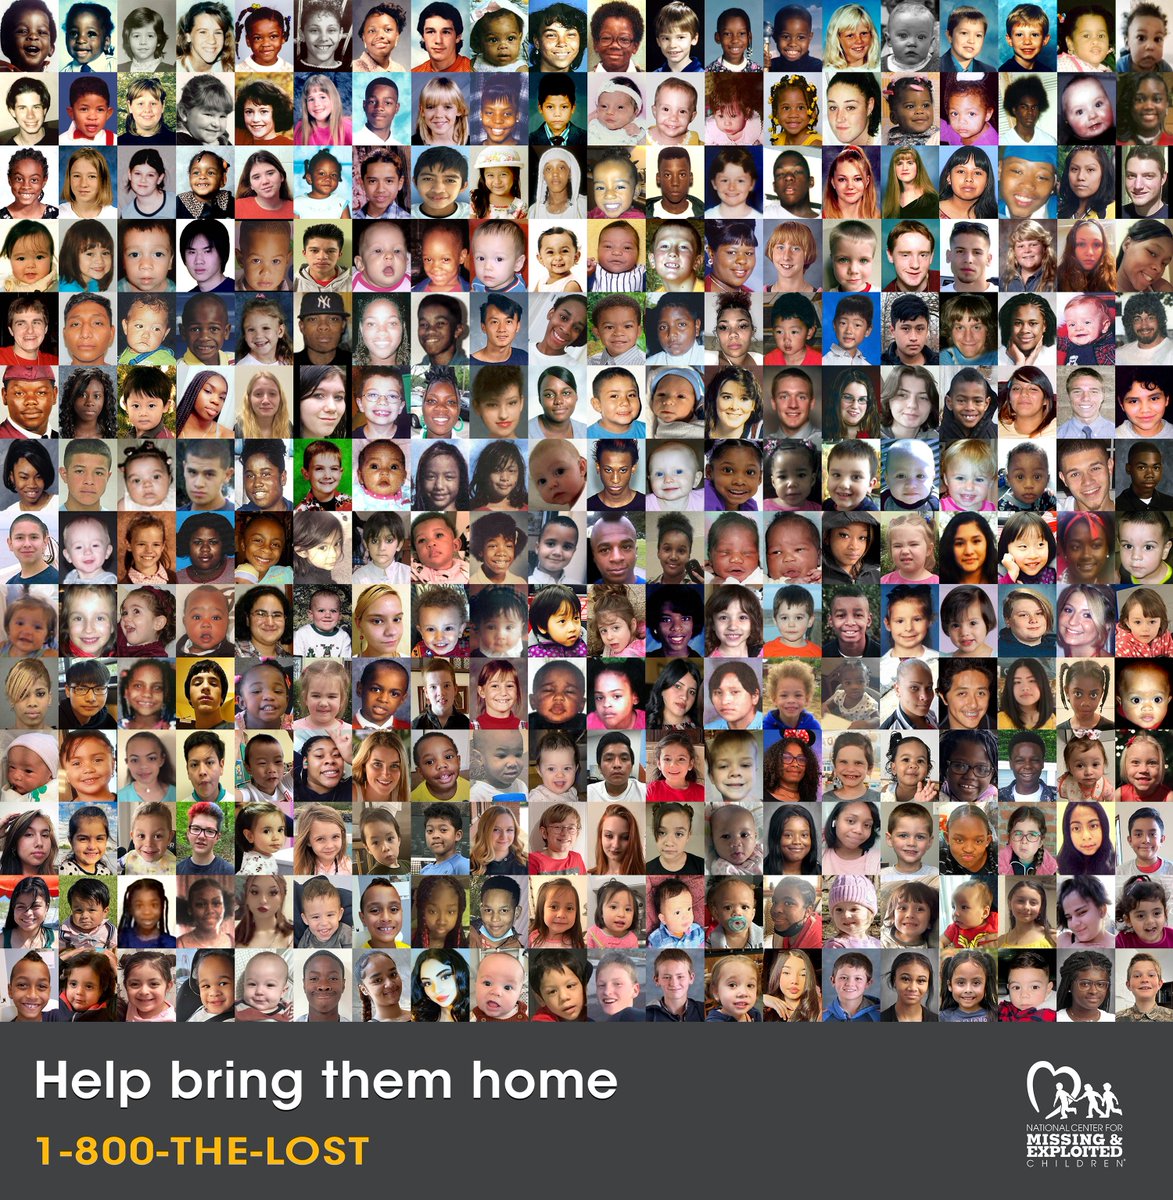 Today is #NationalMissingChildrensDay This day raises awareness for missing children. Since 1984, NCMEC has led efforts to protect children, providing vital resources for their safety. Every face in this photo collage is an active missing child case. You can help bring them